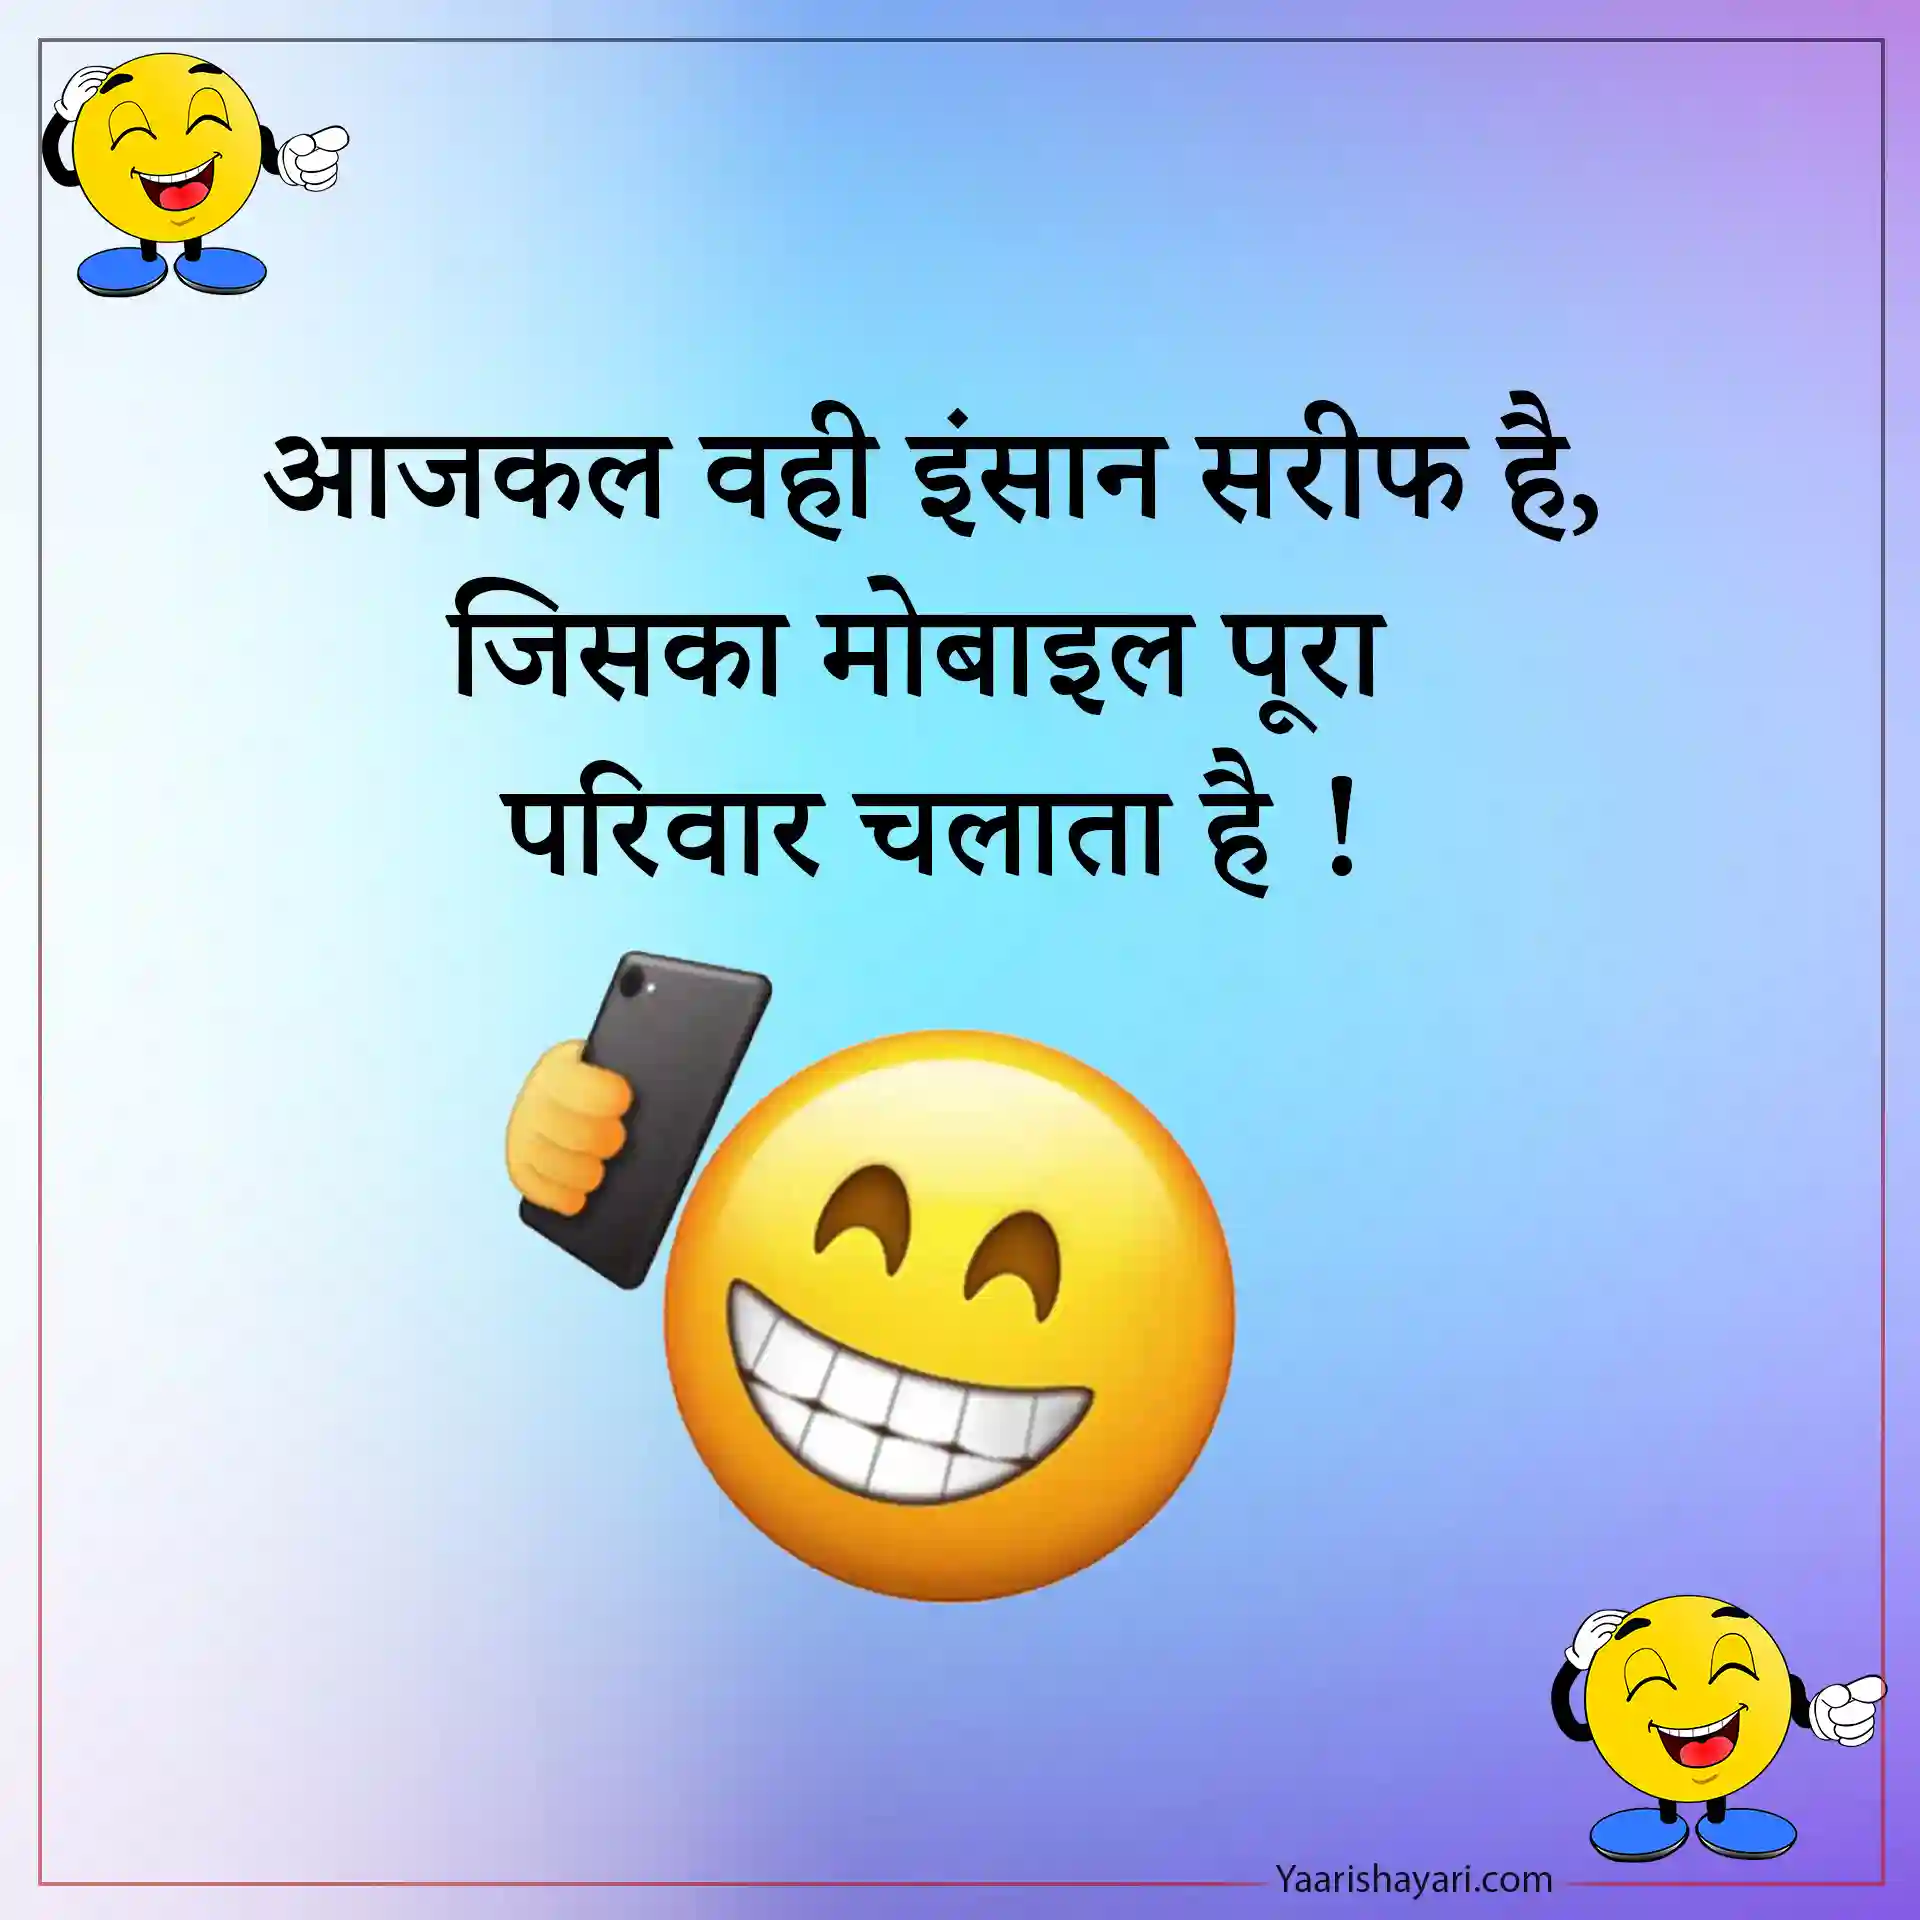 friendship quotes funny in hindi